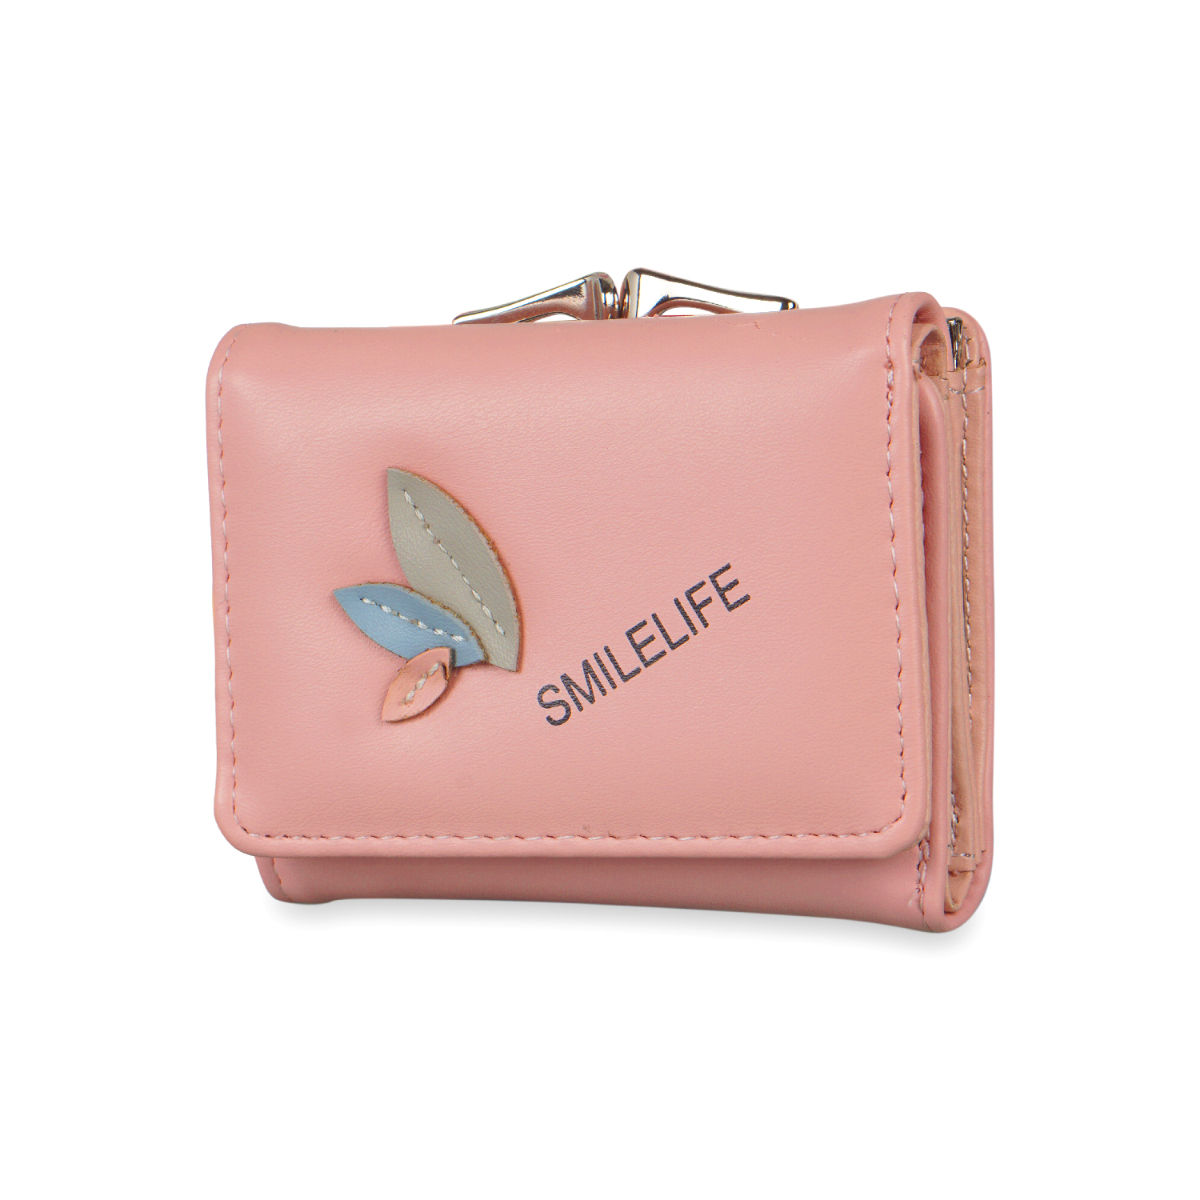 Women's Small Card Case Wallet with Flap. Mini Credit Card Holder. Soft Candy Pink Leather